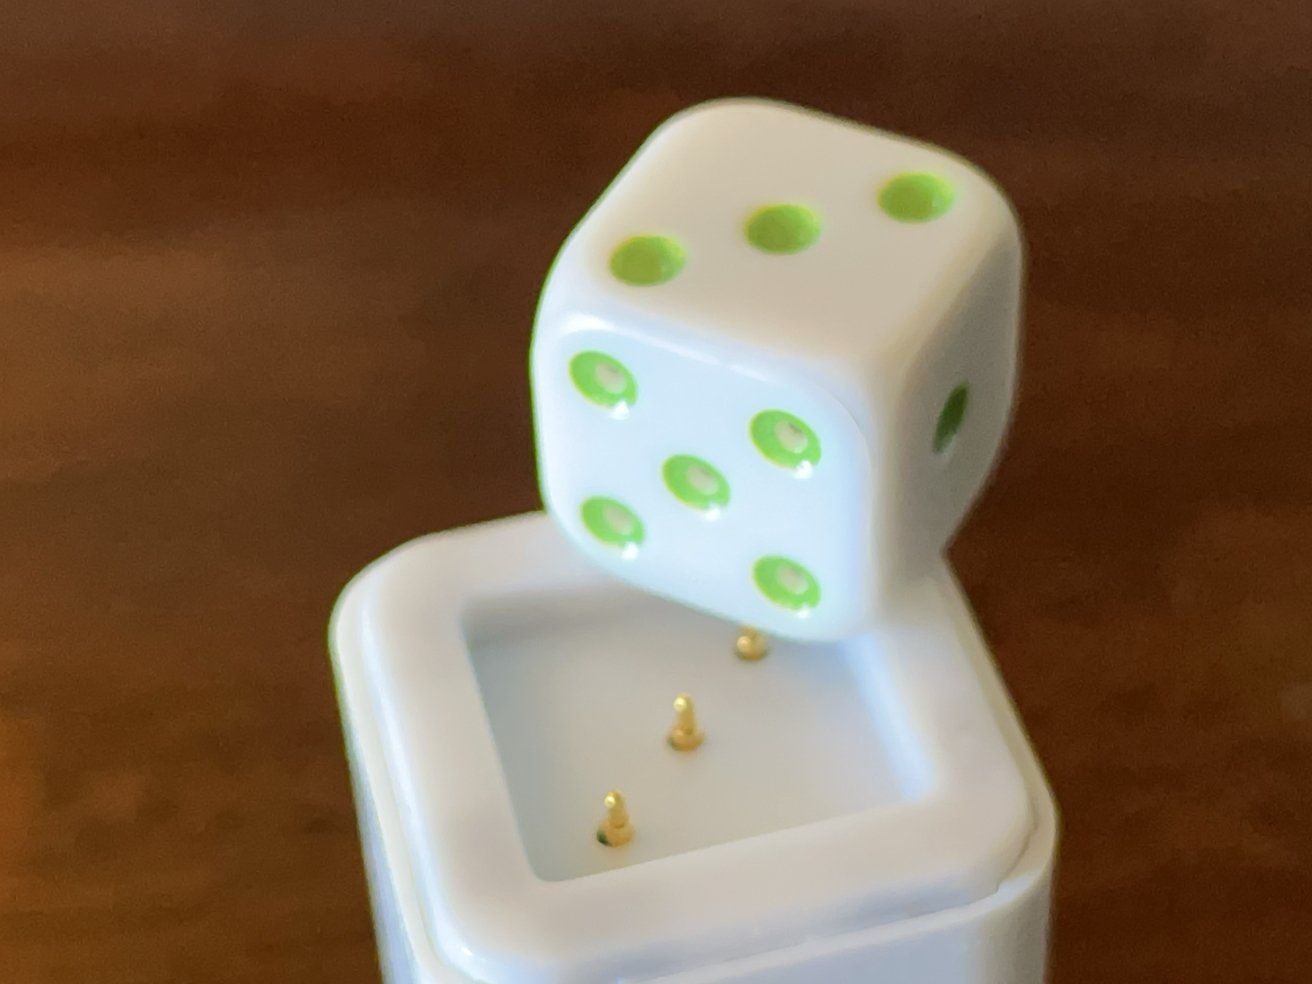 Charging is done by pressing the five face of the dice onto the charging base